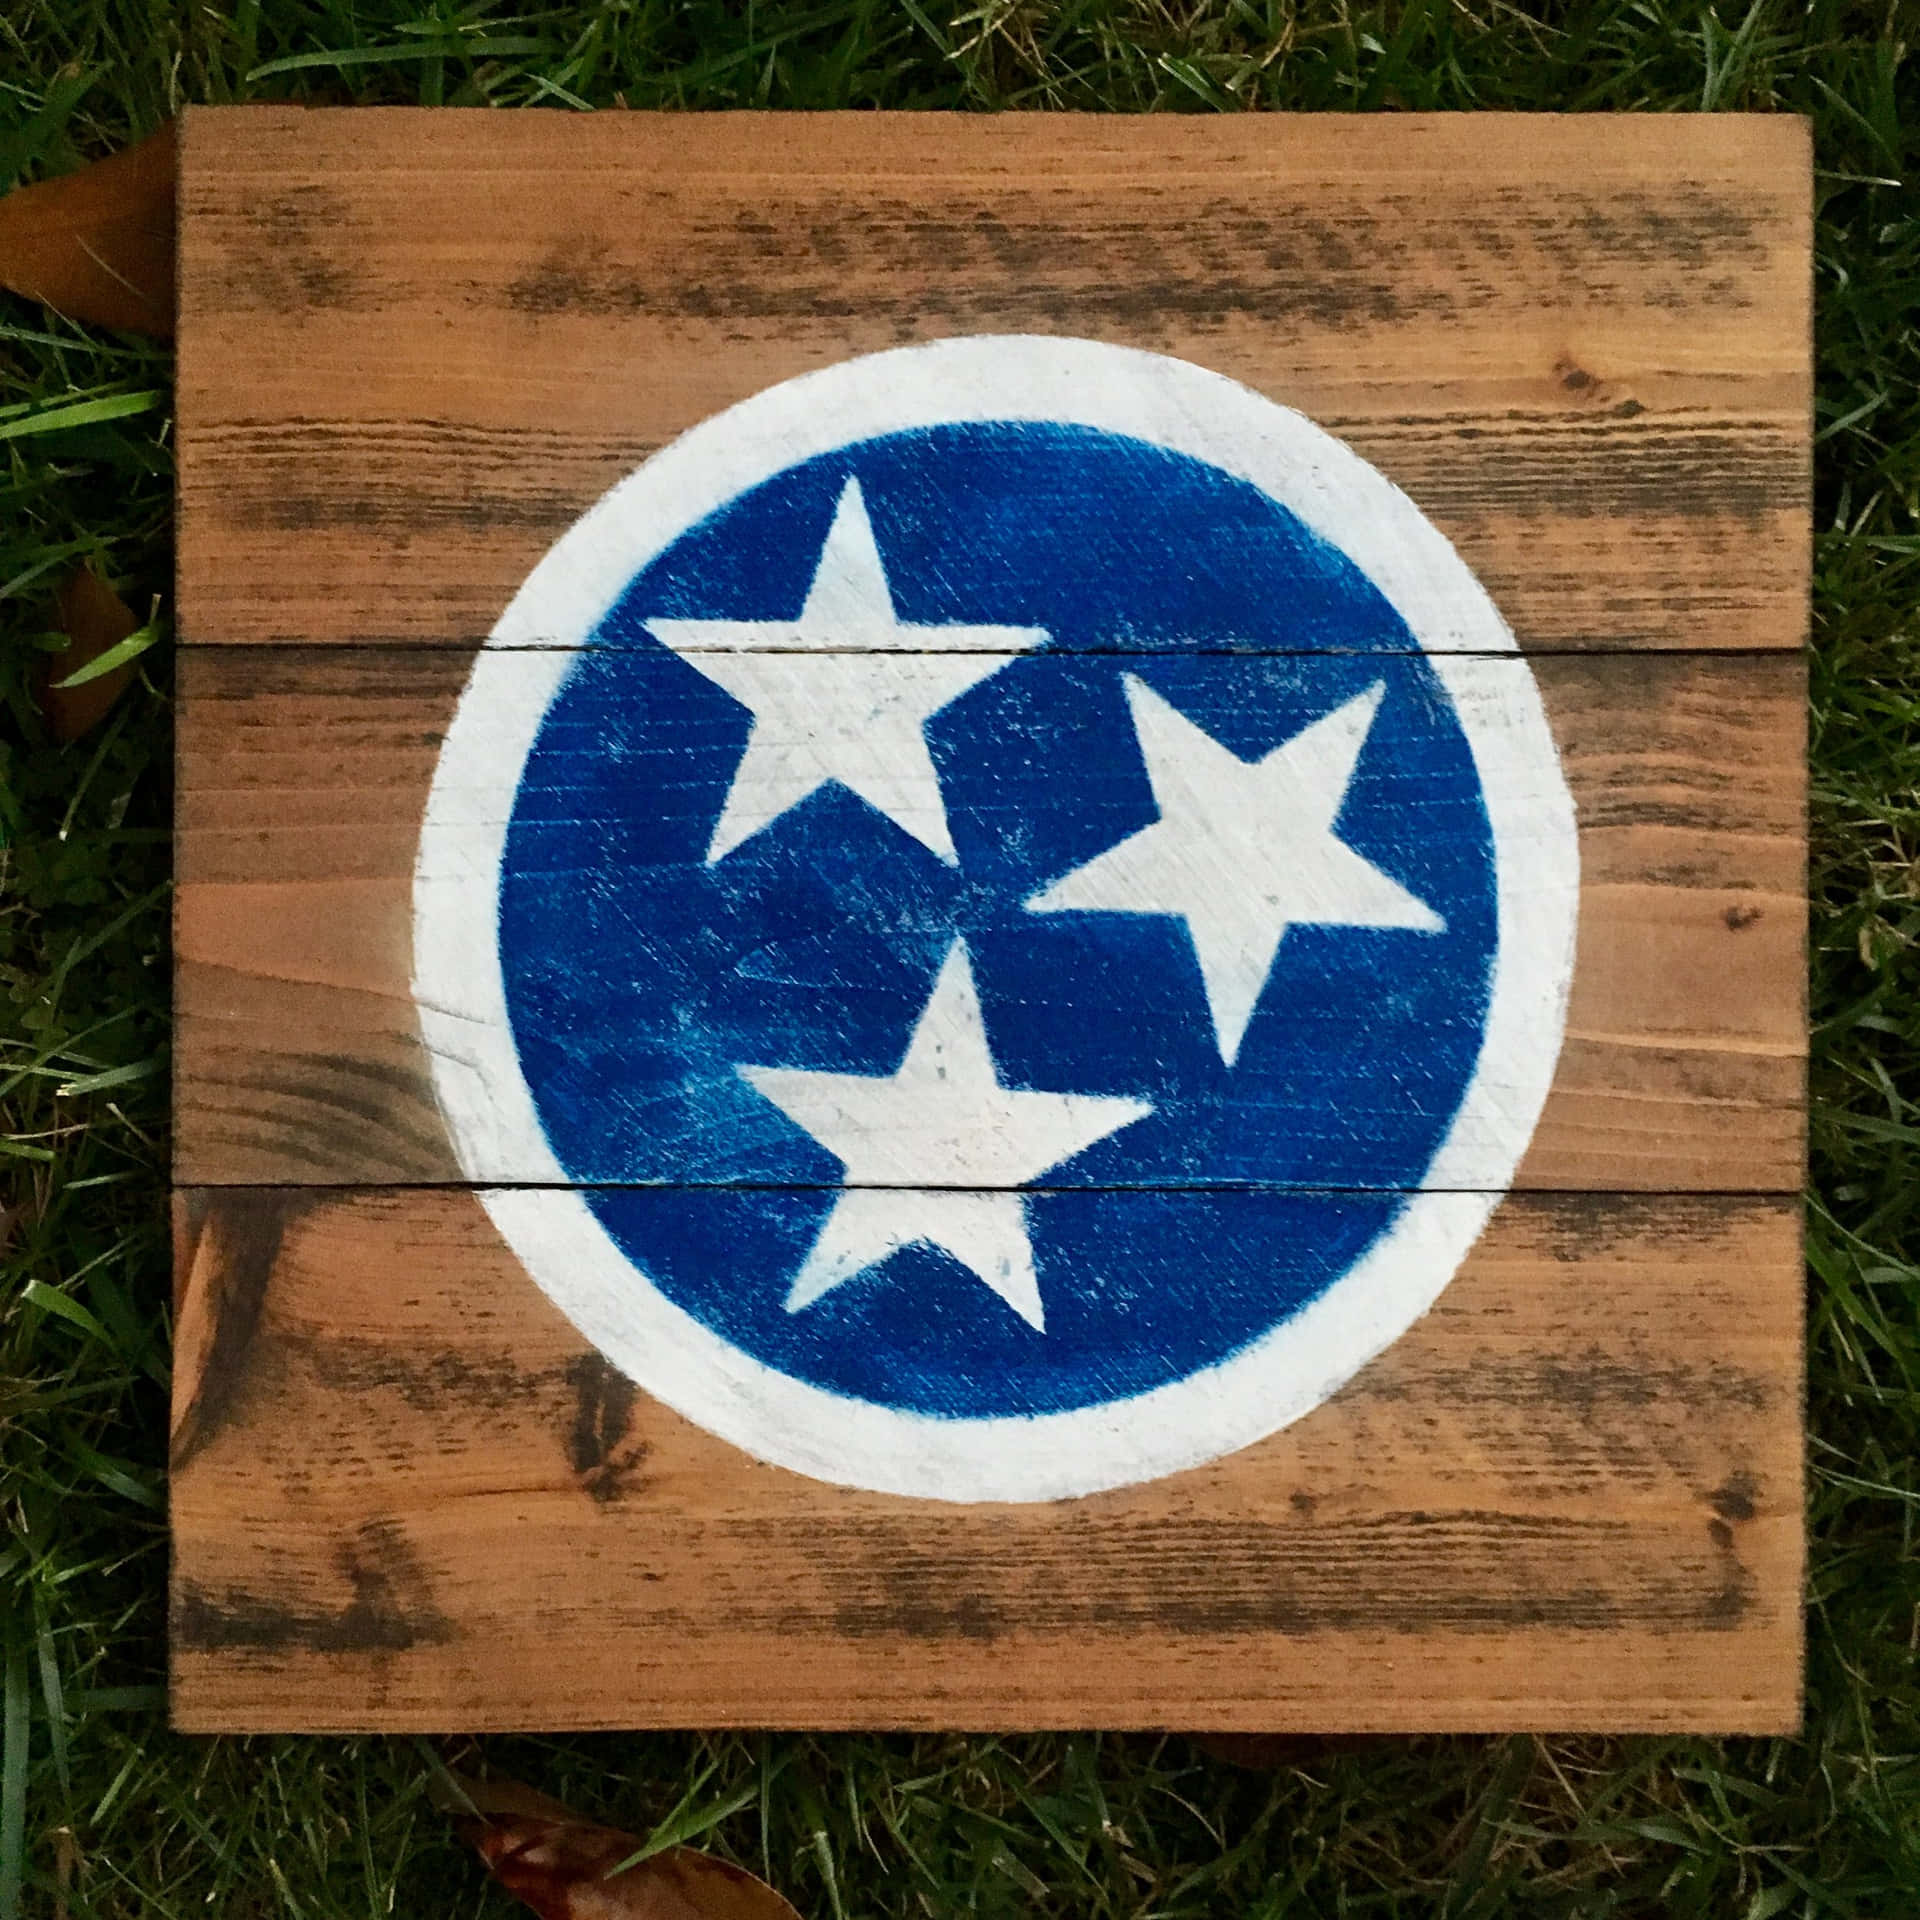 Tennessee State Flag Painted On A Wooden Board Wallpaper